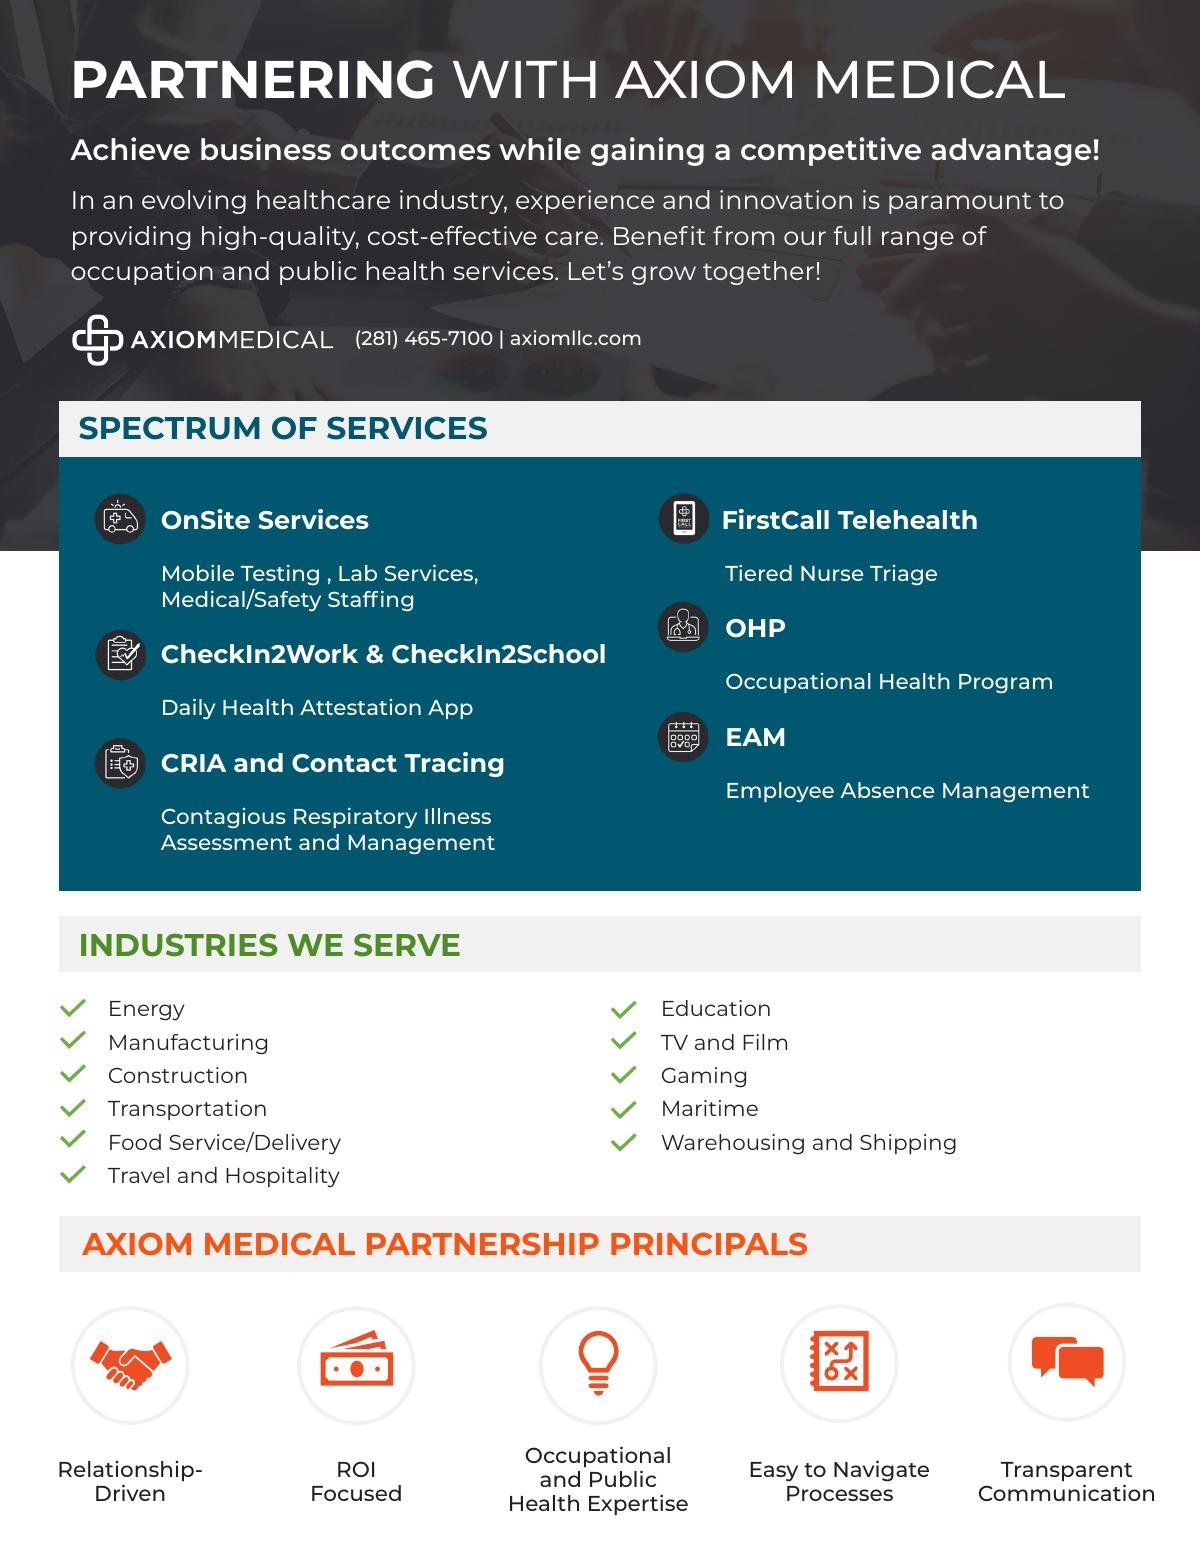 Partnering With Axiom Medical: An Overview of Our Services